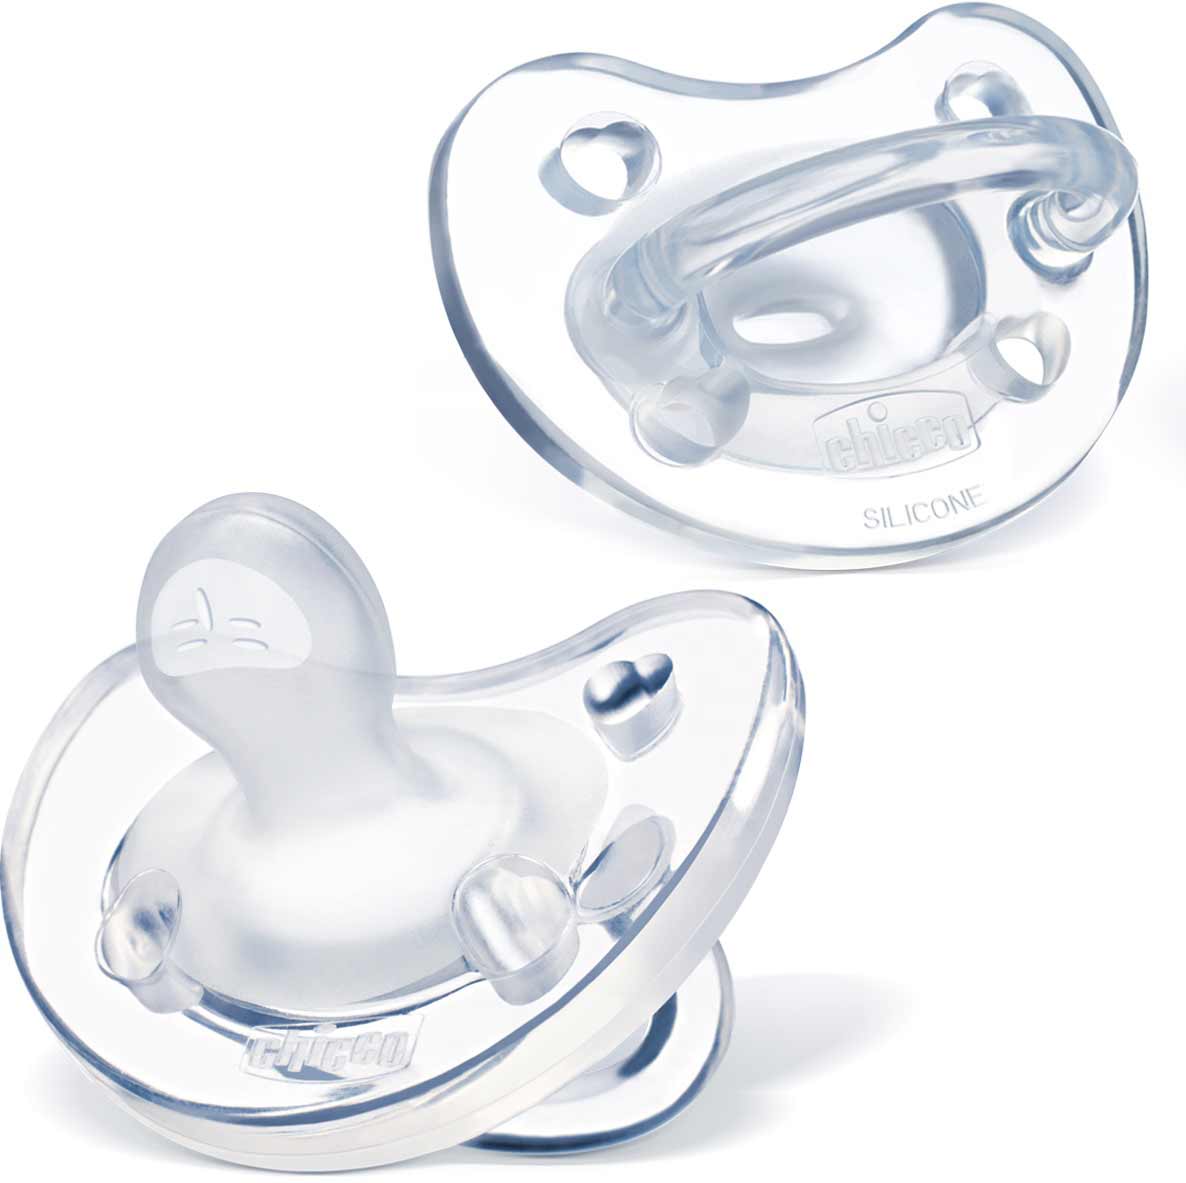 How to Choose Your Pacifier's Nipple Shape